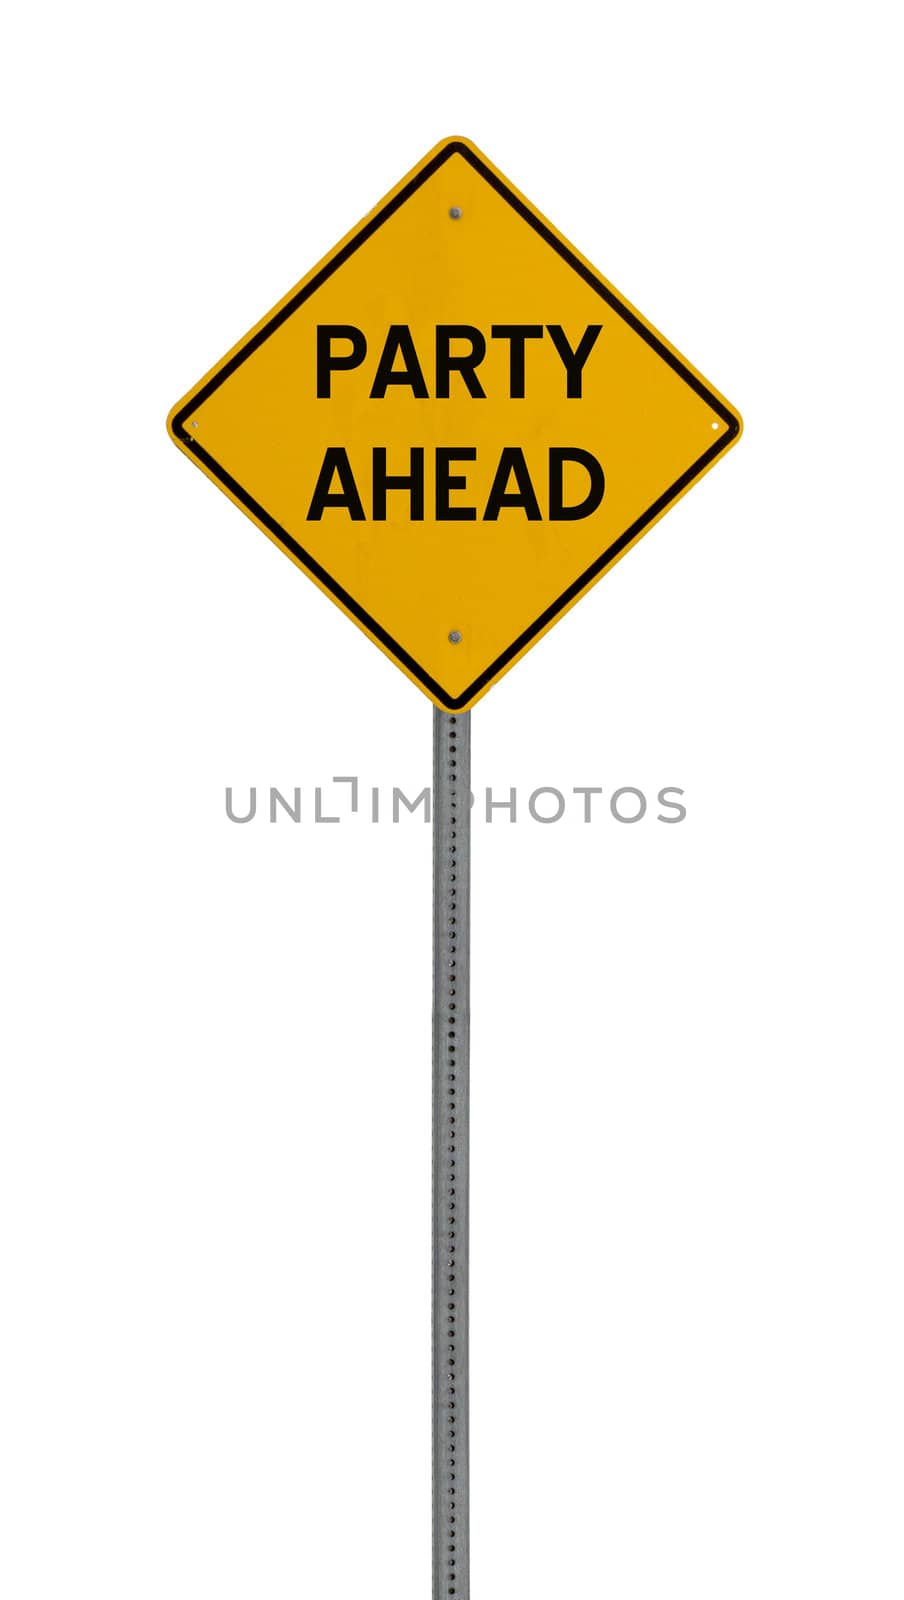 party ahead - Yellow road warning sign by jeremywhat